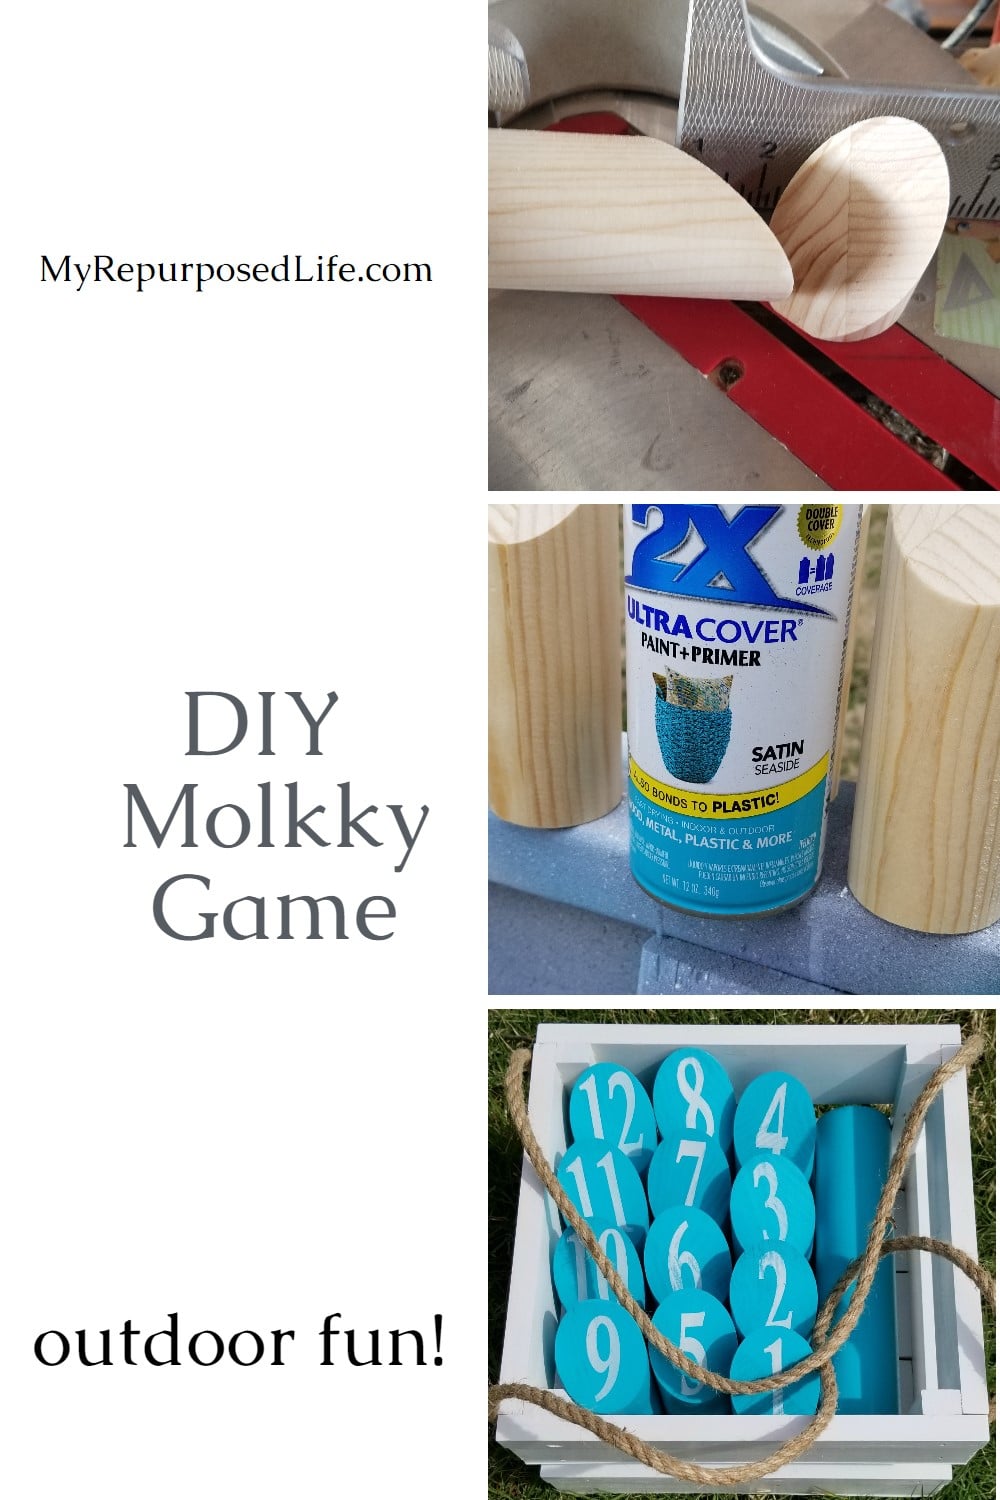 How to make a DIY Molkky game for outdoor fun in the backyard or even while camping. This fun lawn game is easy and inexpensive to make. #MyRepurposedLife #diy #game via @repurposedlife